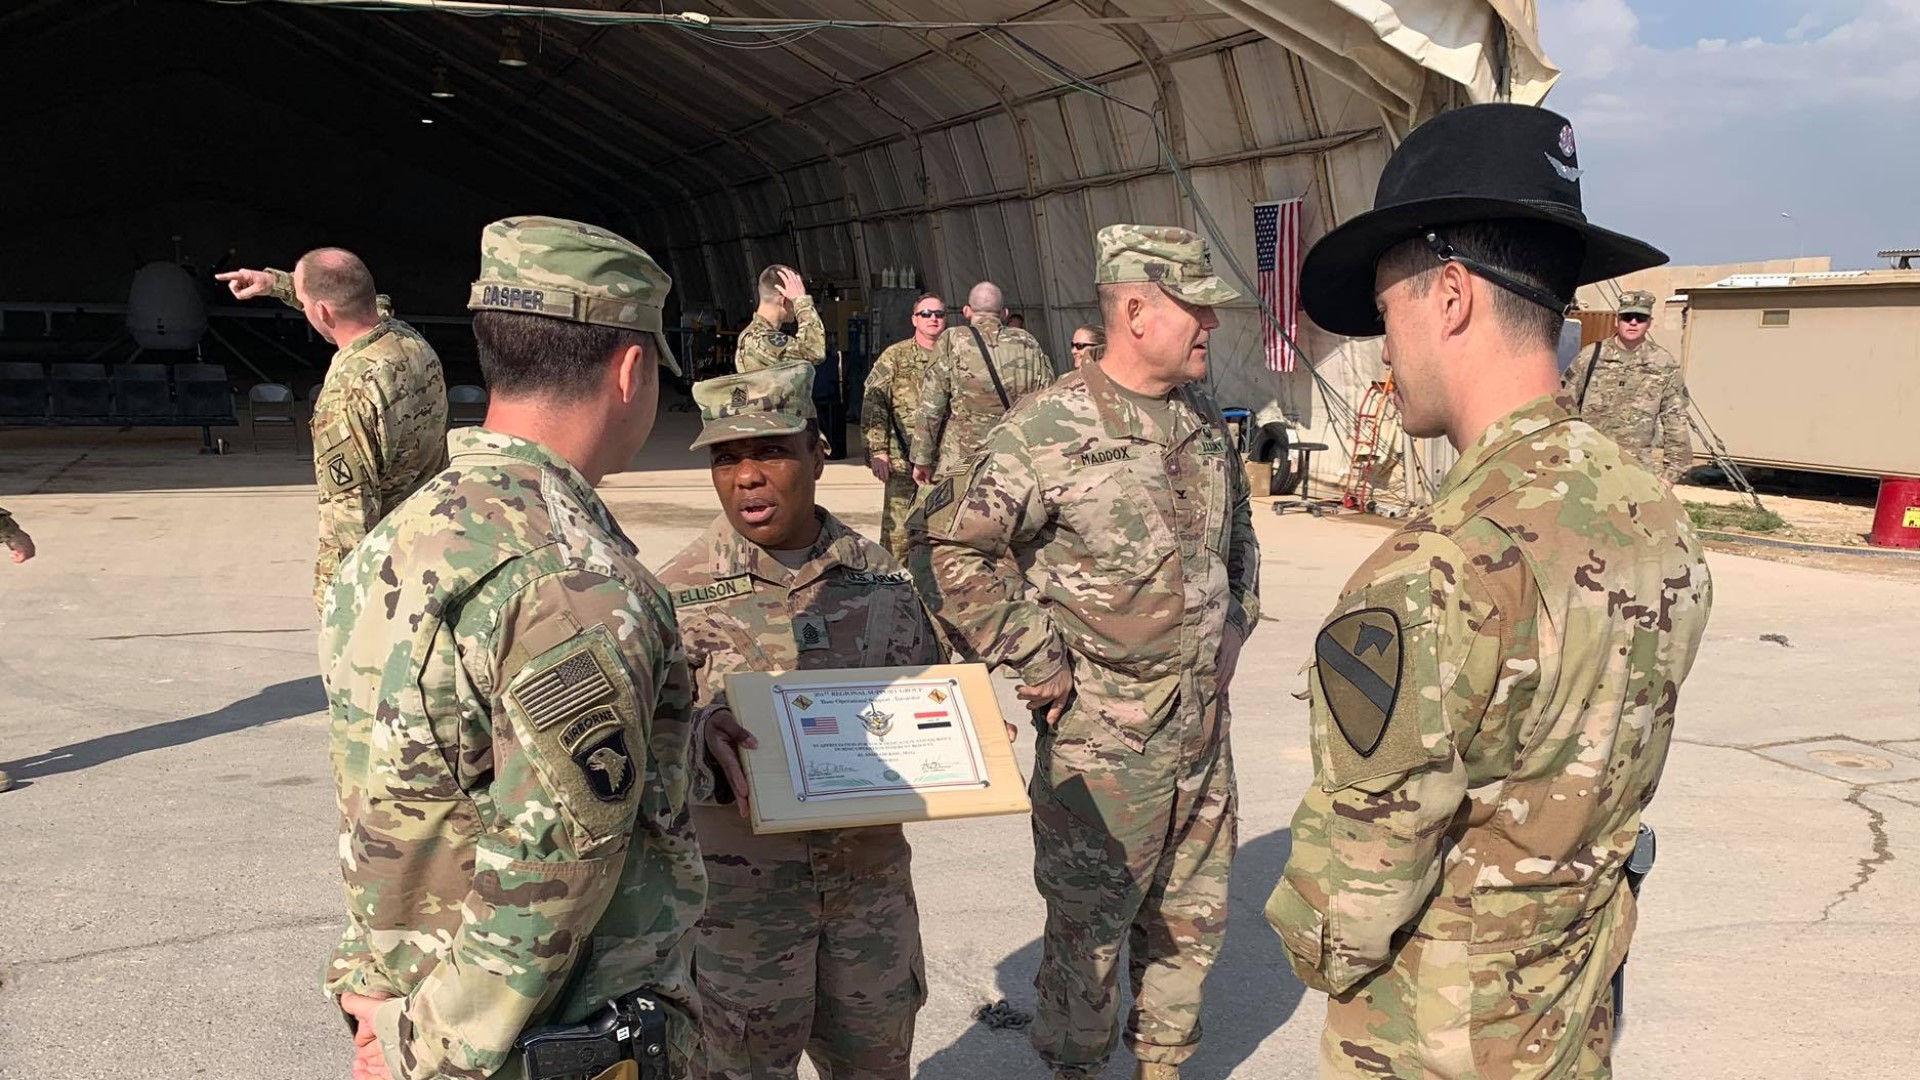 While in Iraq, Company F, 1st Battalion, 227th Aviation Regiment performed a variety of tasks, including security and target acquisition. They also helped the mission by flying nearly 14,000 combat flight hours in support of coalition forces.

They are expected to arrive home at 4 p.m. on Friday.